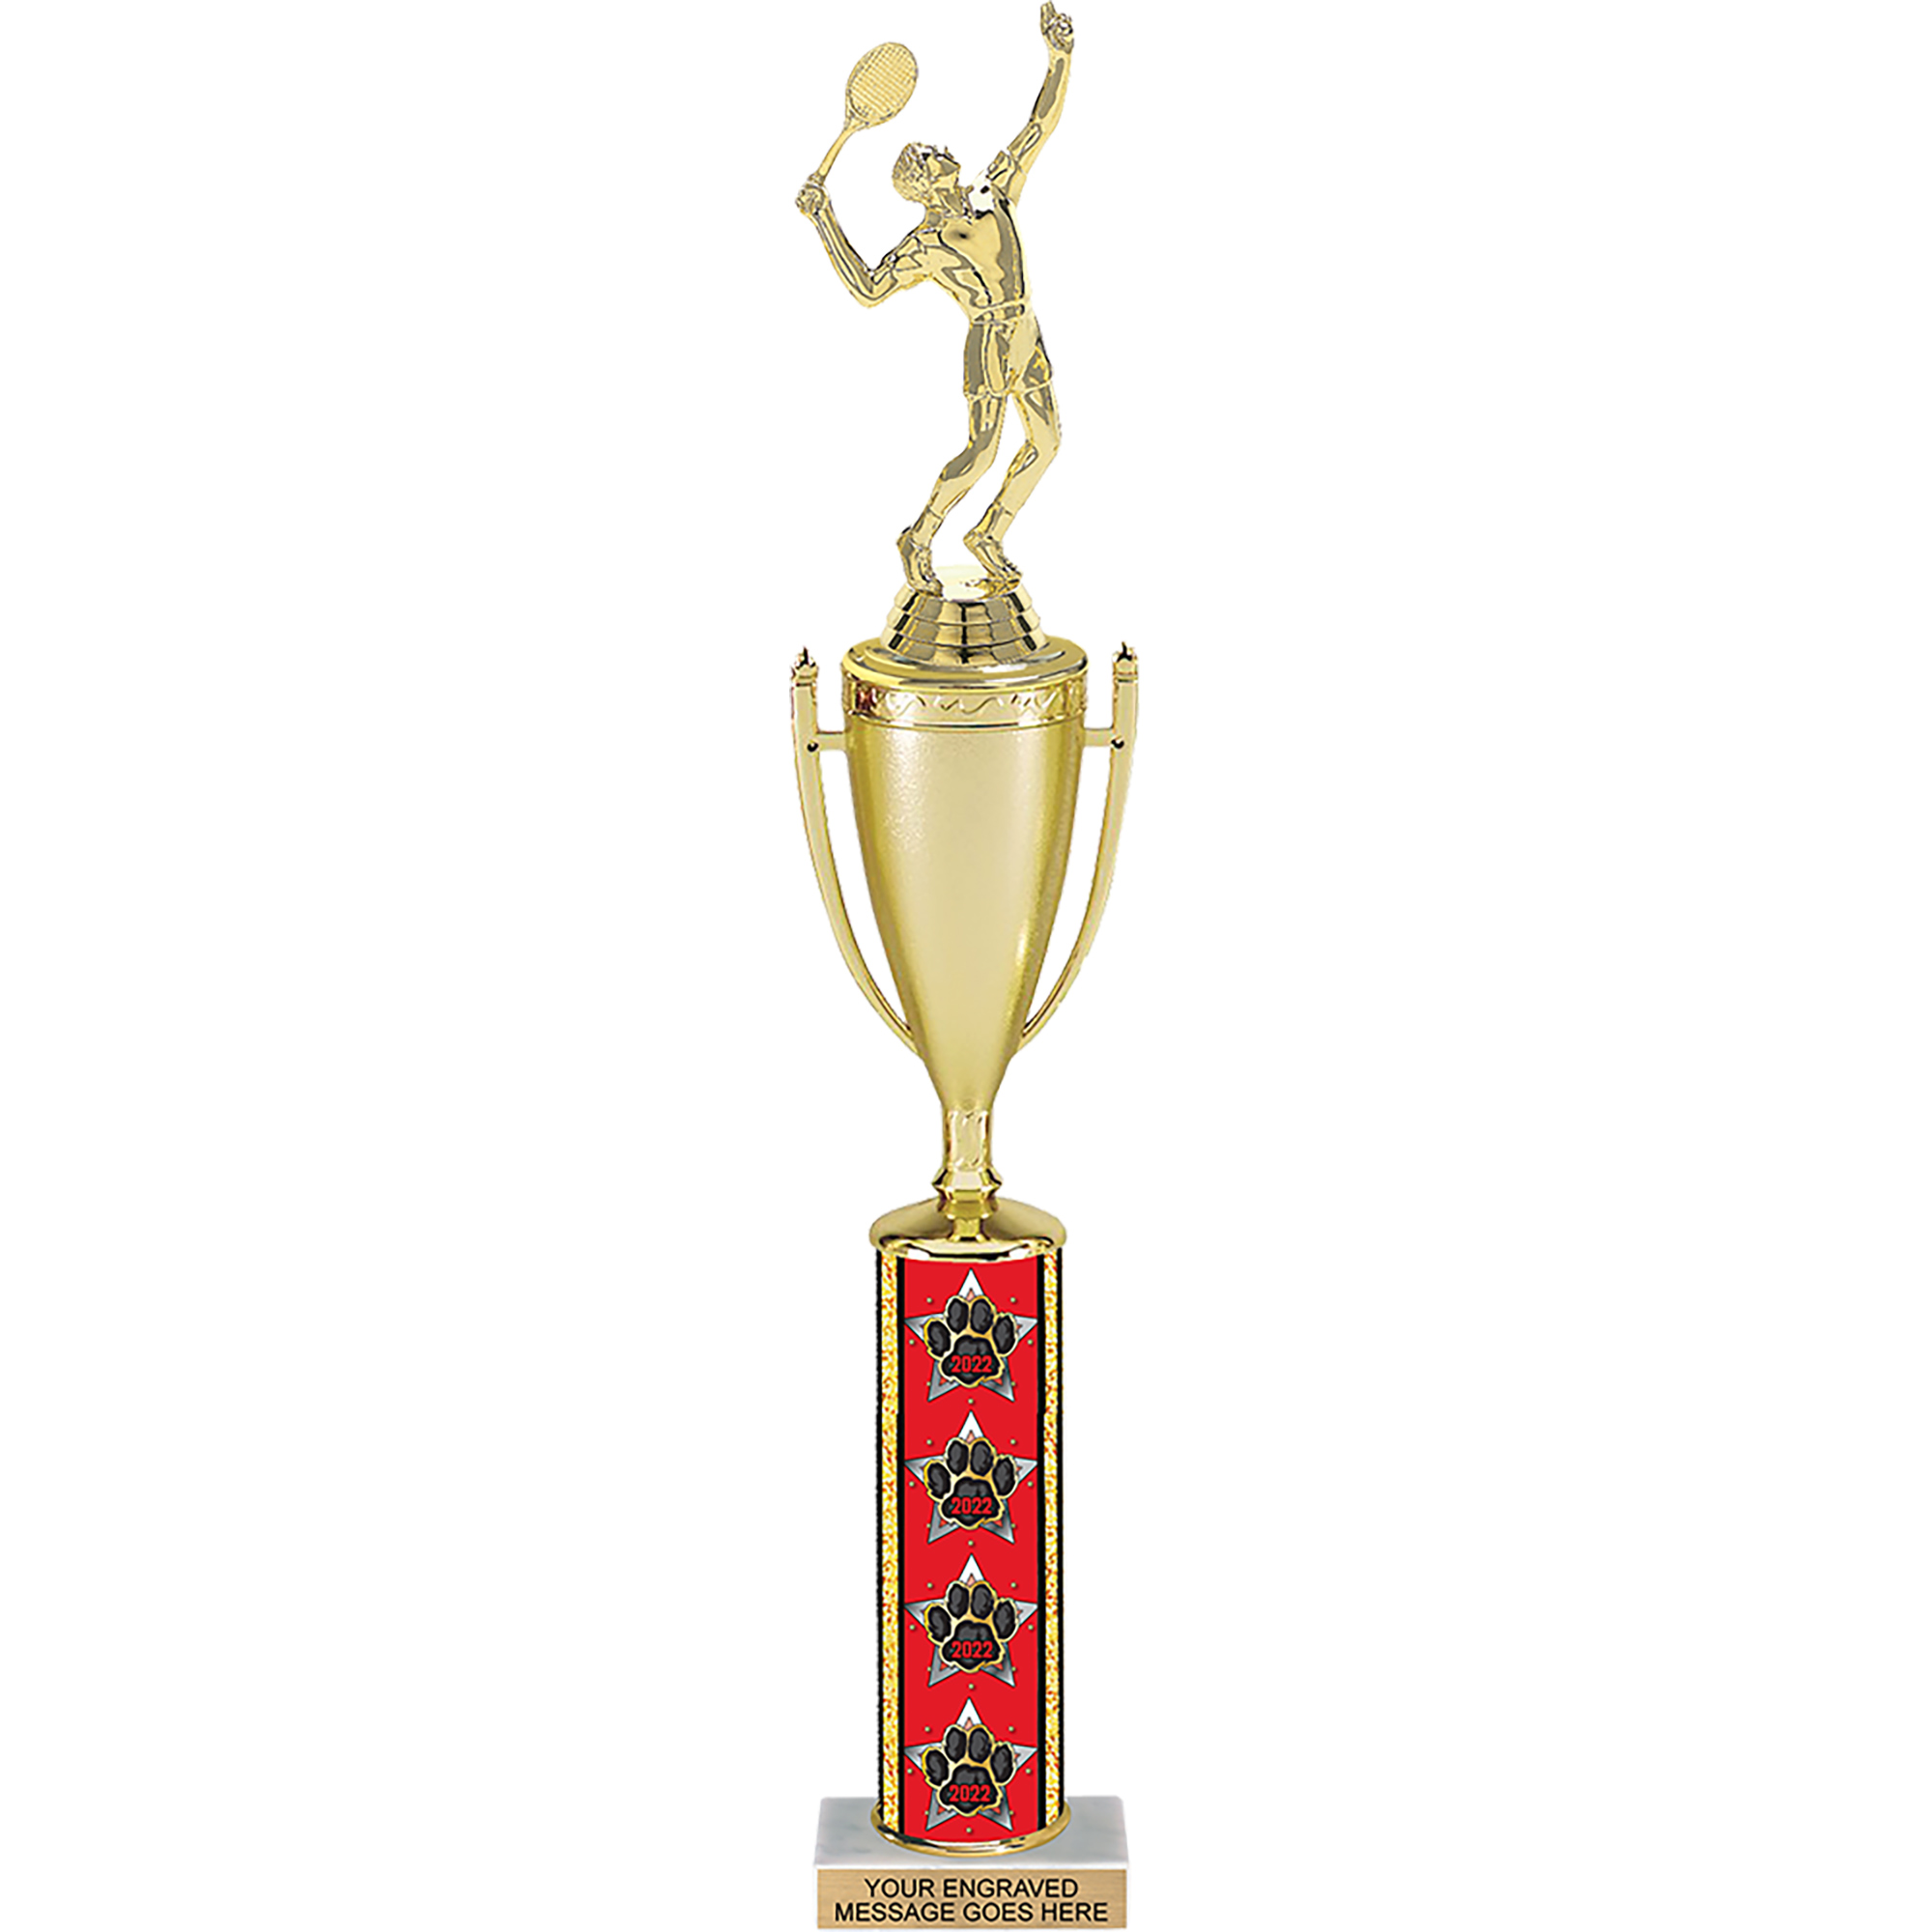 Paw 2022 Column Cup Trophy - 17 inch